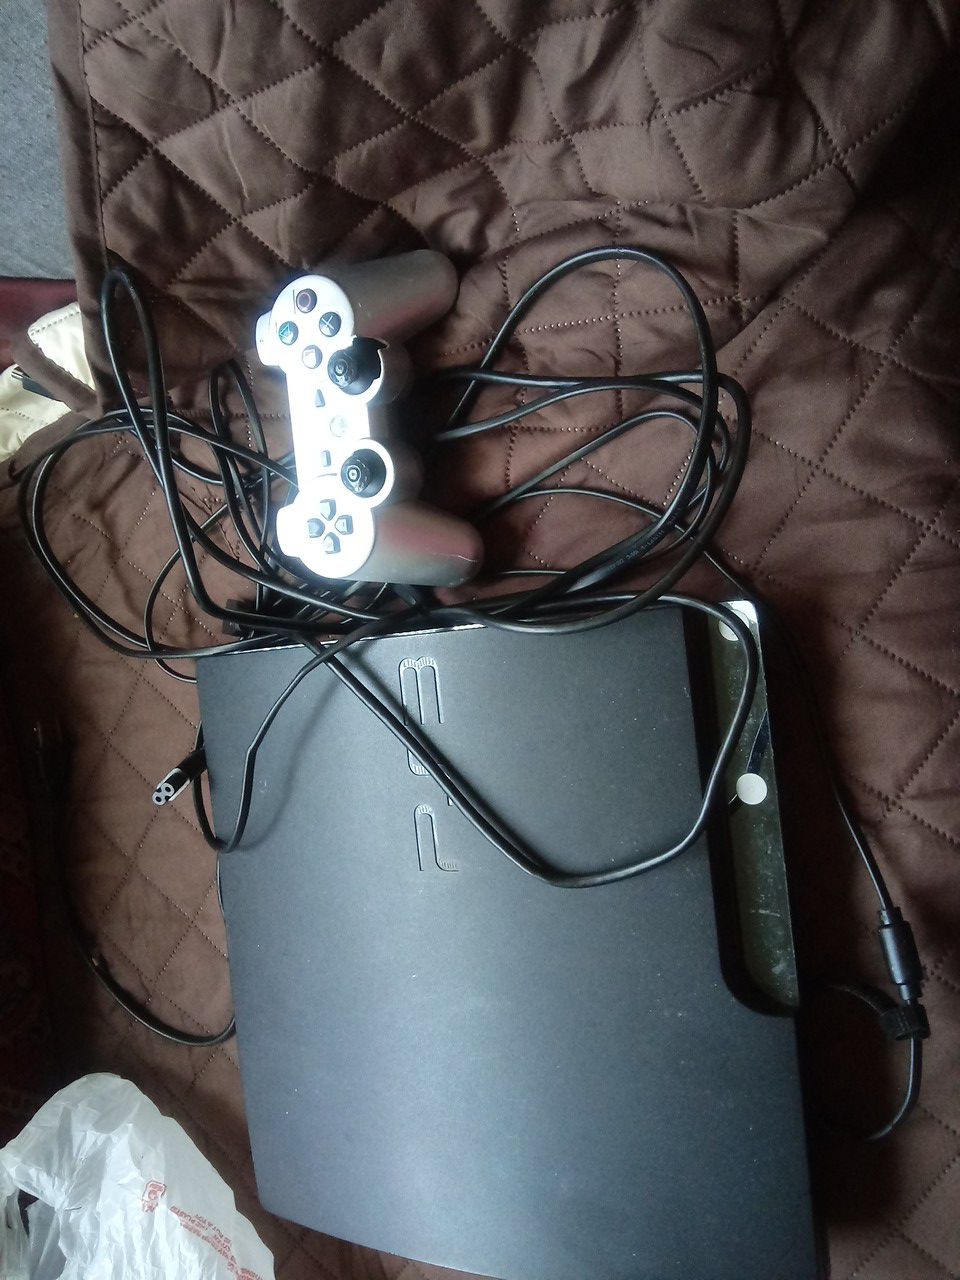 Ps3 with controller